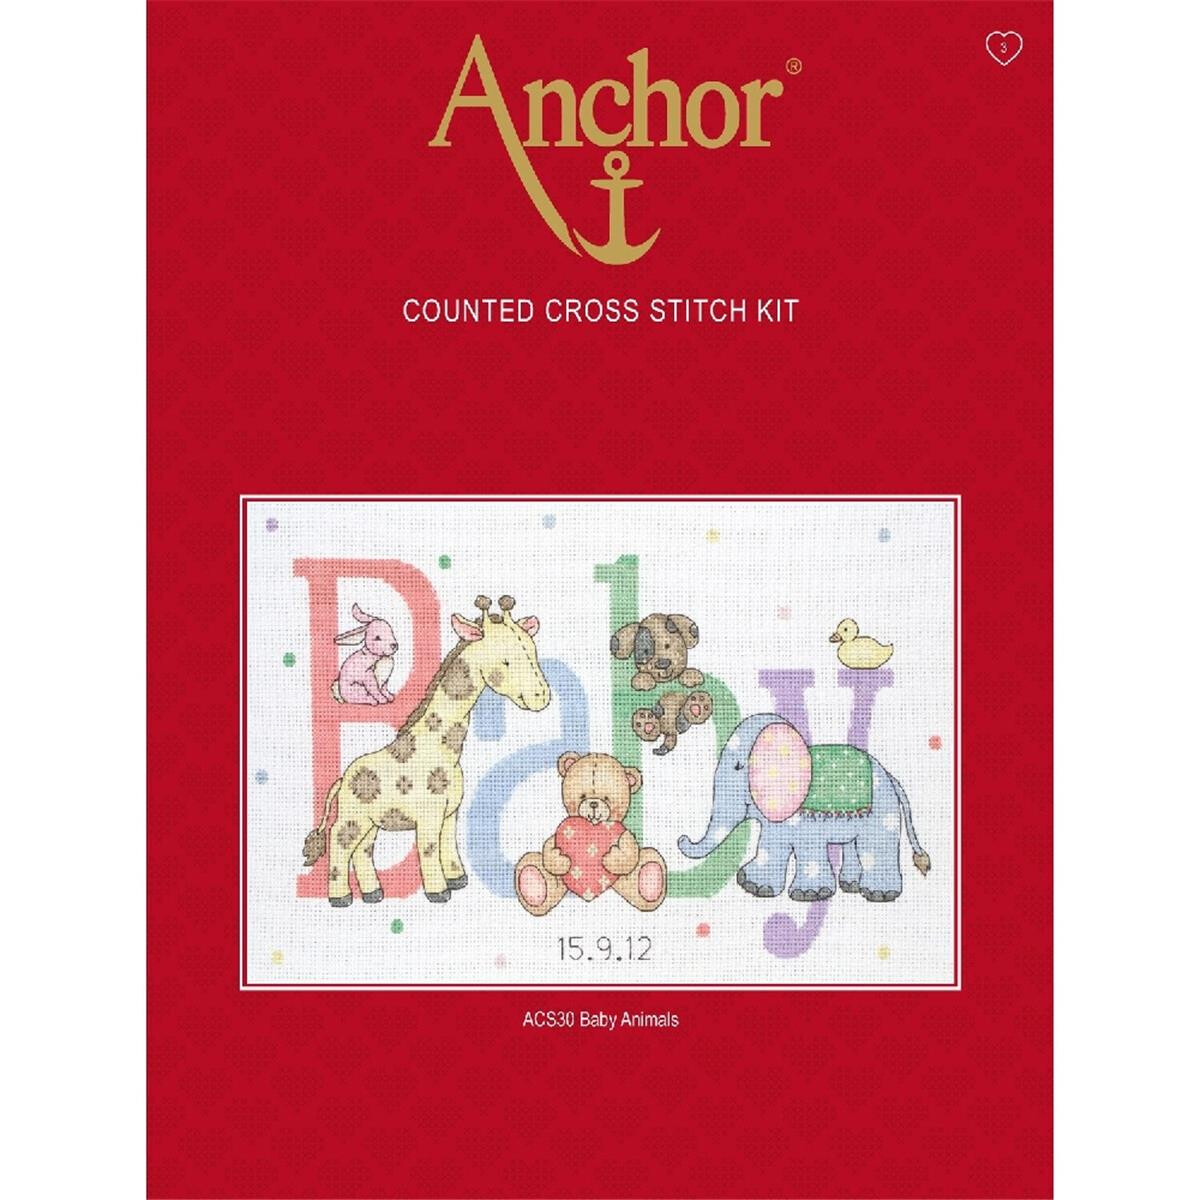 Anchor counted Cross Stitch kit "Baby Animals",...